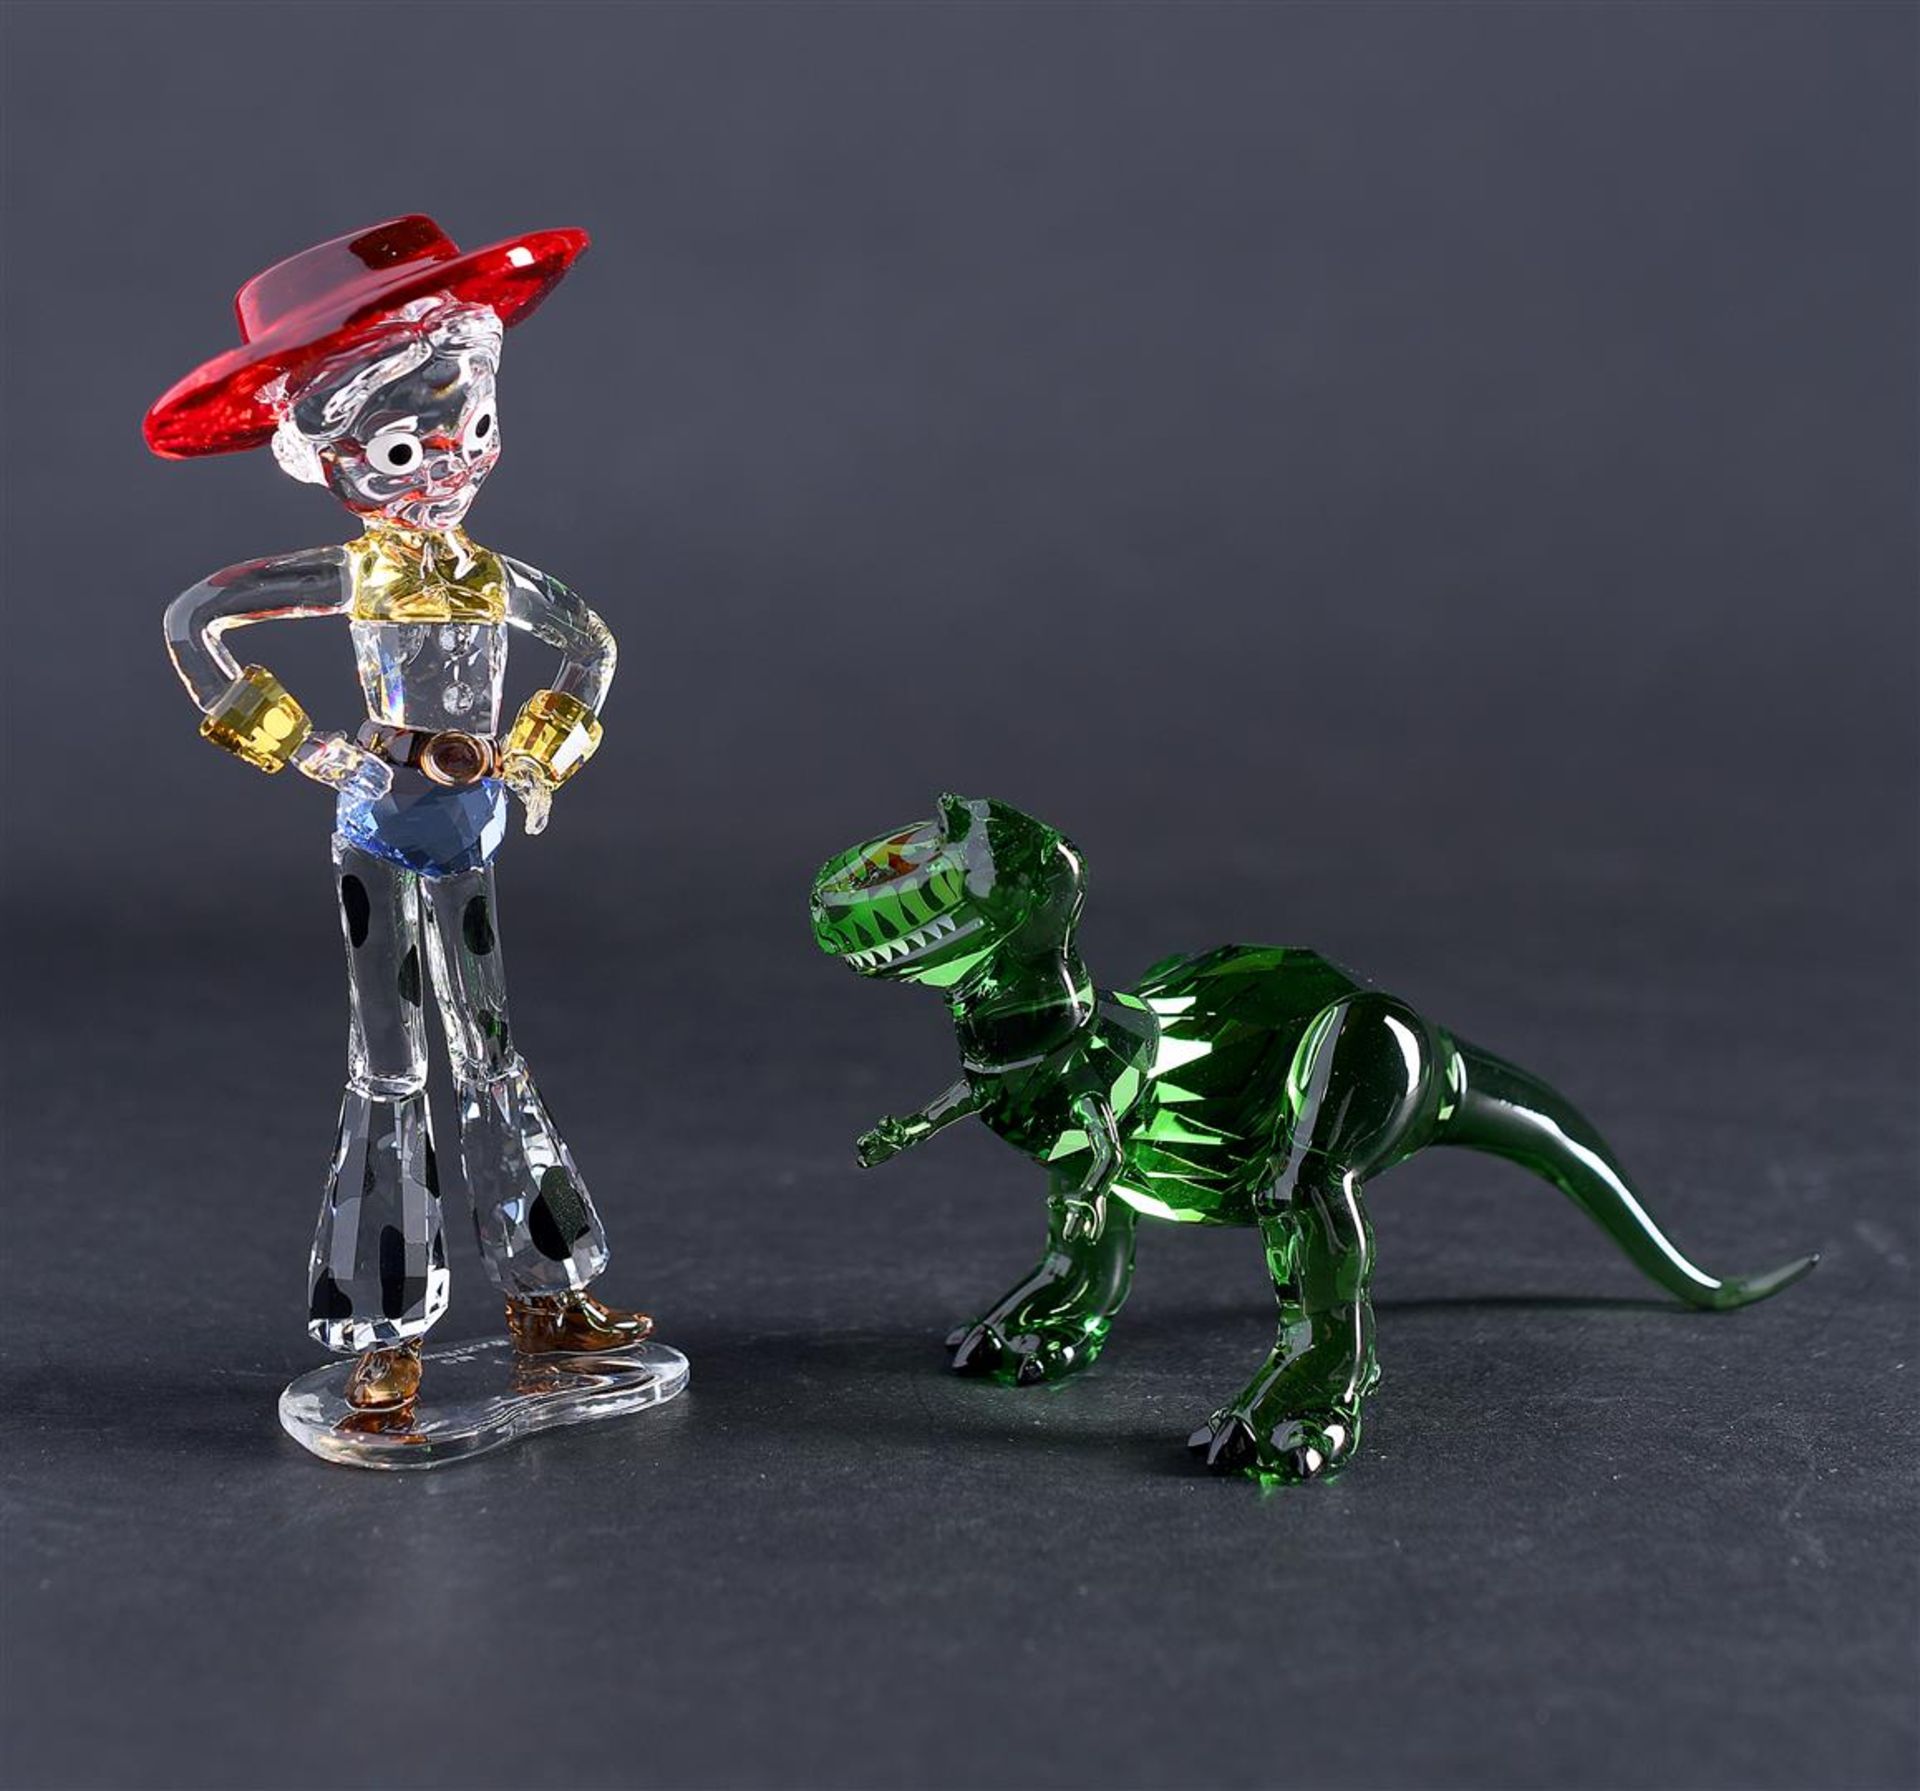 Swarovski, Toy story Rex and Jessie, 5492734 & 5492686. Year of release 2020. In original box. - Image 4 of 6